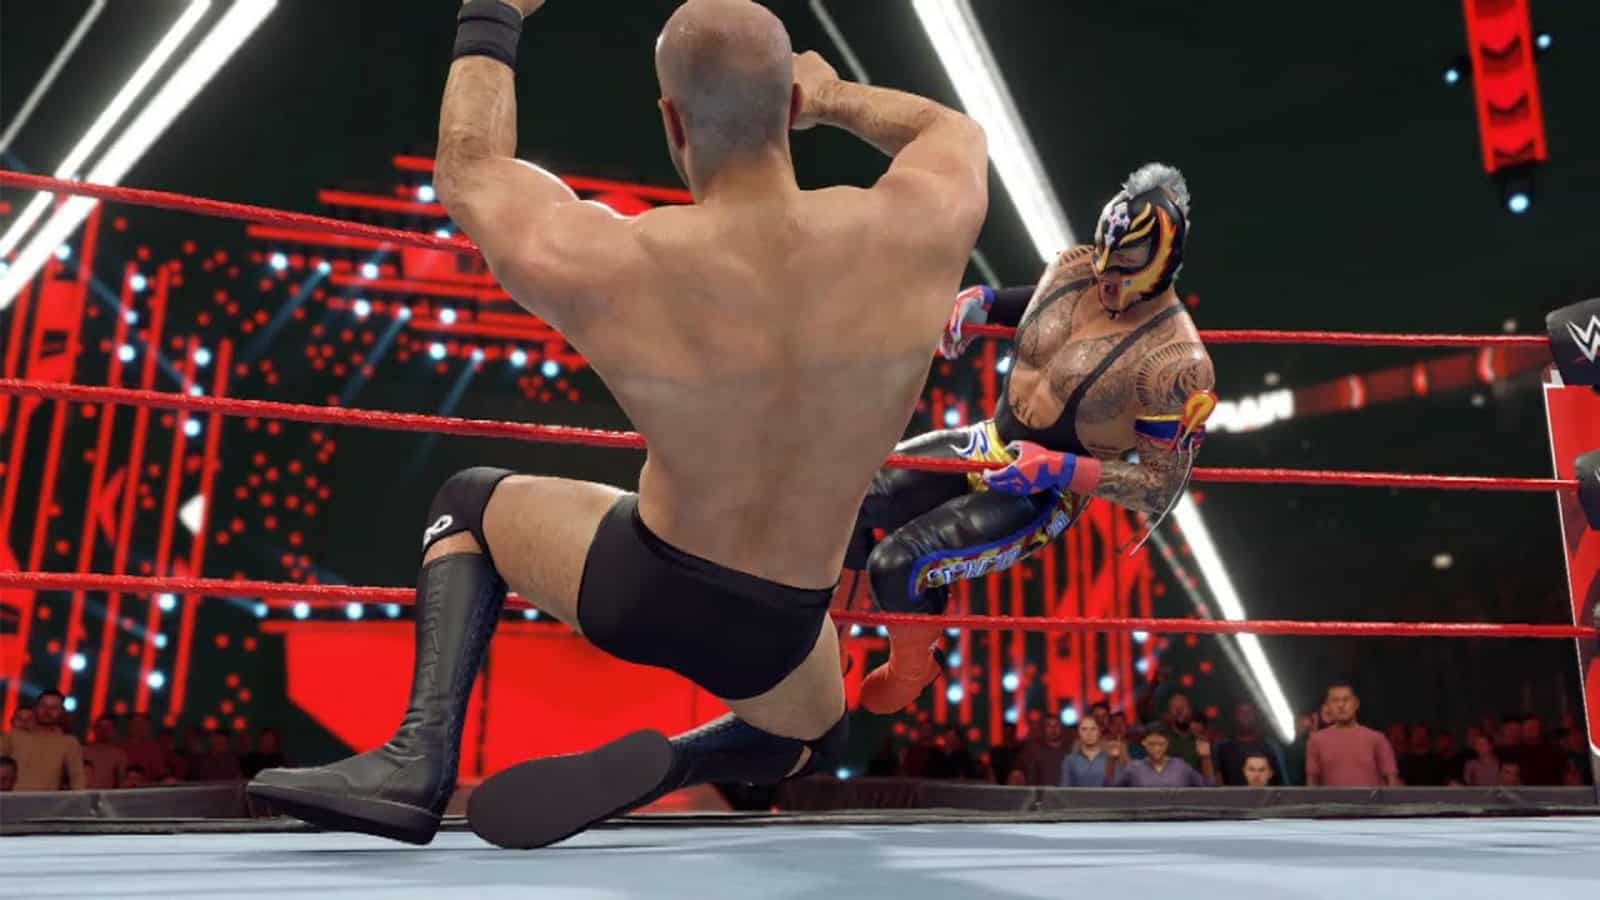 Res Mysterio delivering 619 to The Miz in WWE 2K